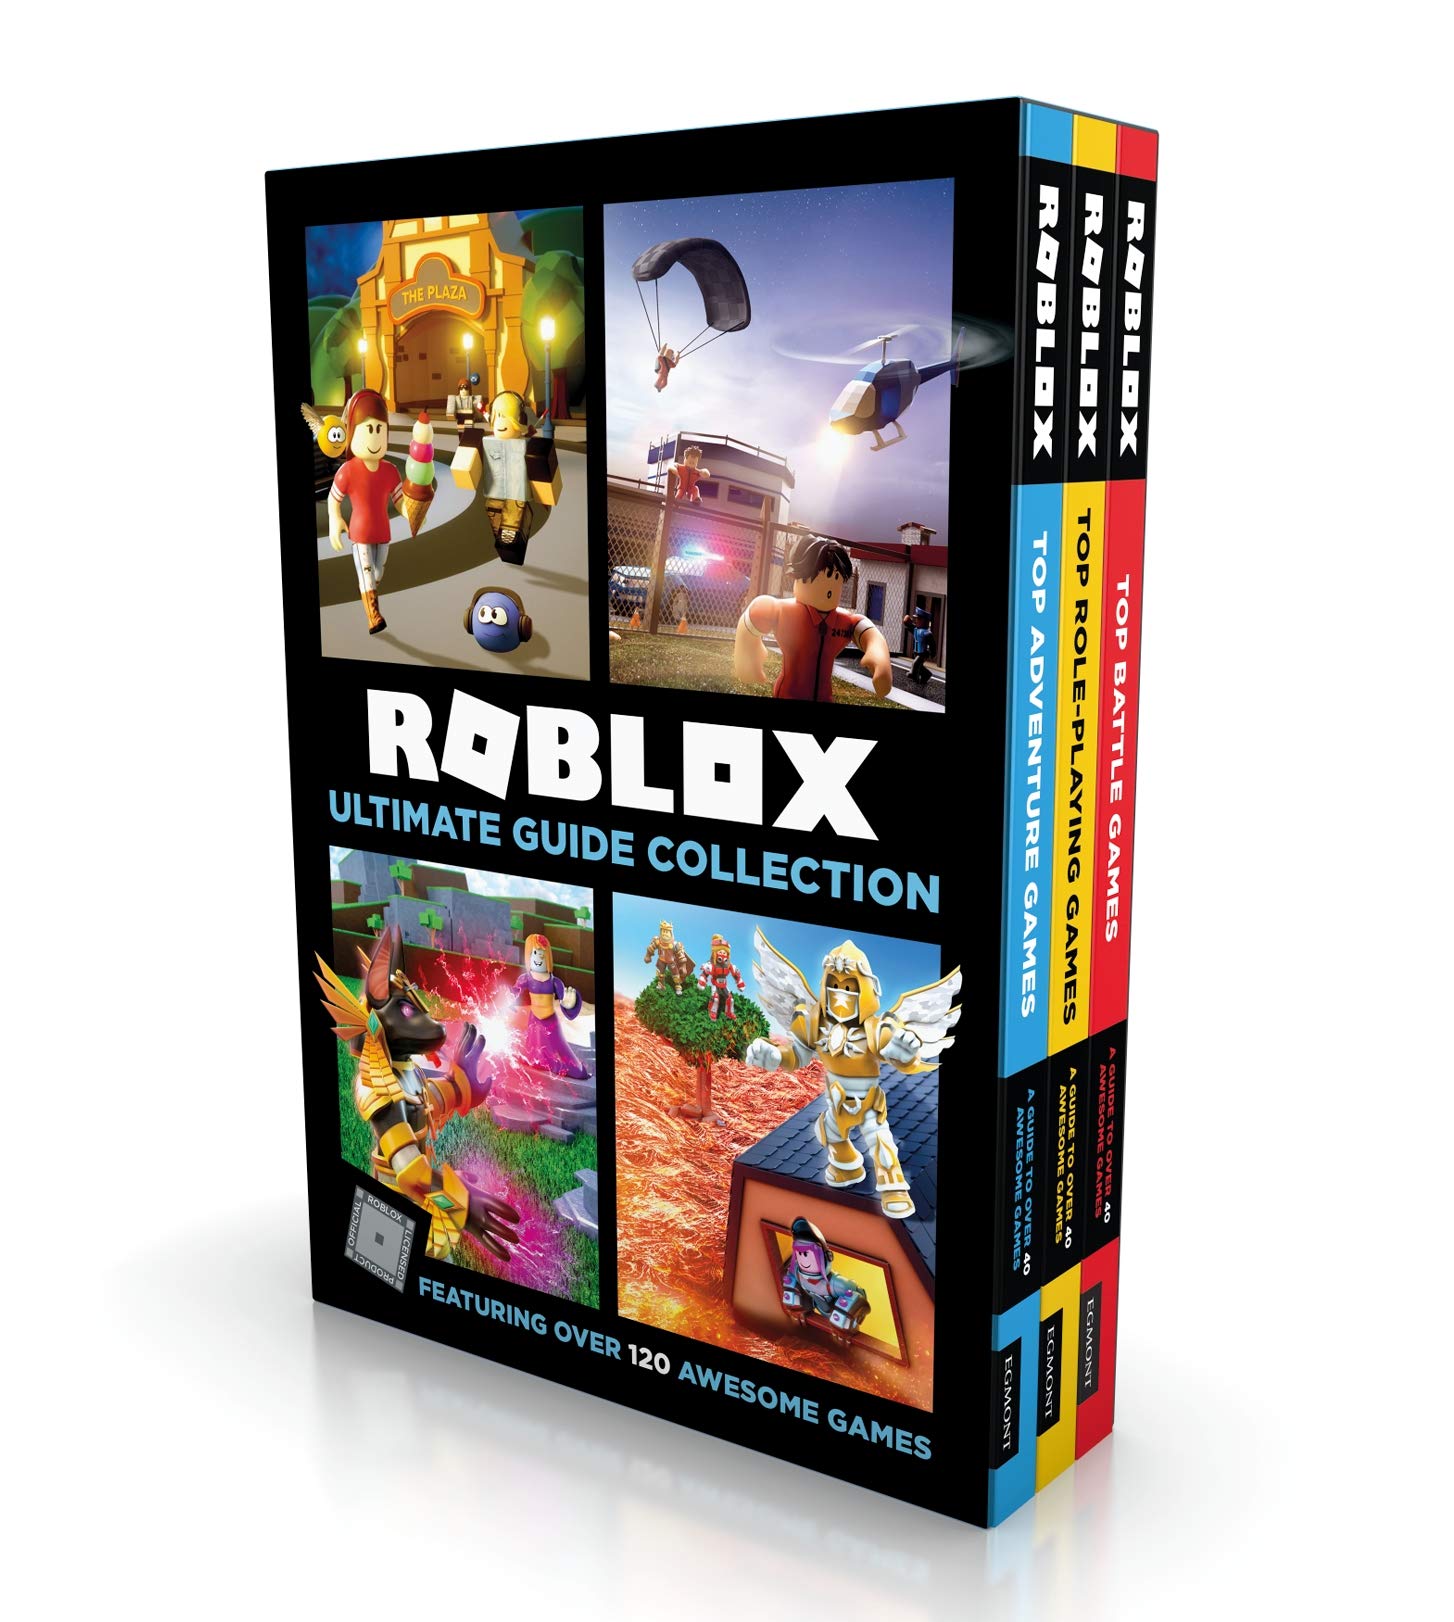 Roblox Ultimate Guide Collection | Egmont Publishing UK